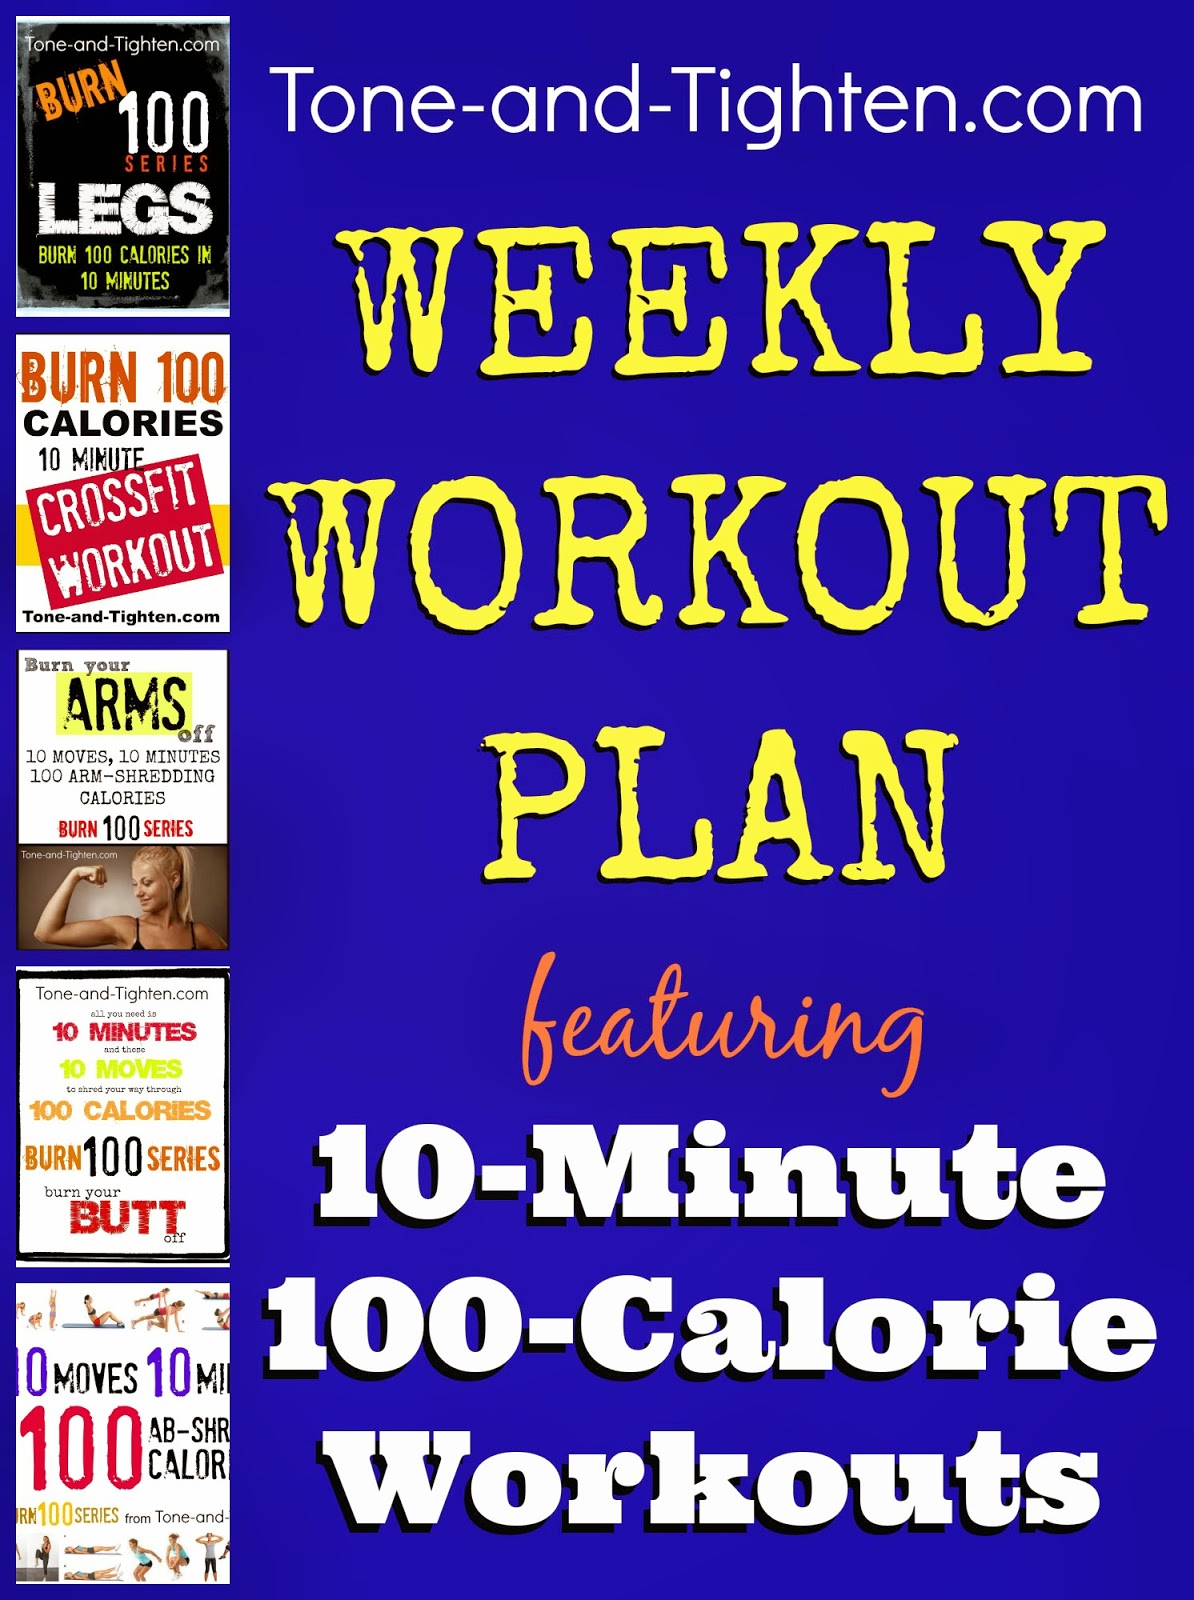 Weekly Workout Plan – 10-Minute Workouts To Burn 100 Calories